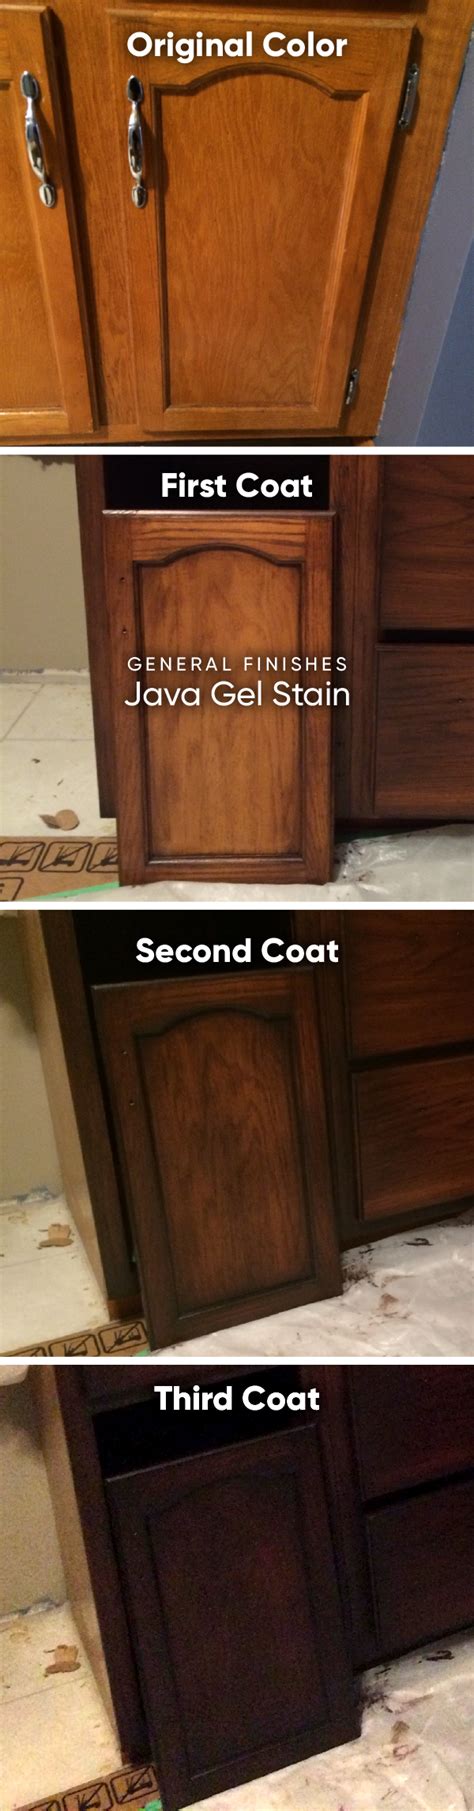 Everything you need · durable protection · rich color · smooth finish General Finishes Gel Stain, Java | Staining cabinets ...